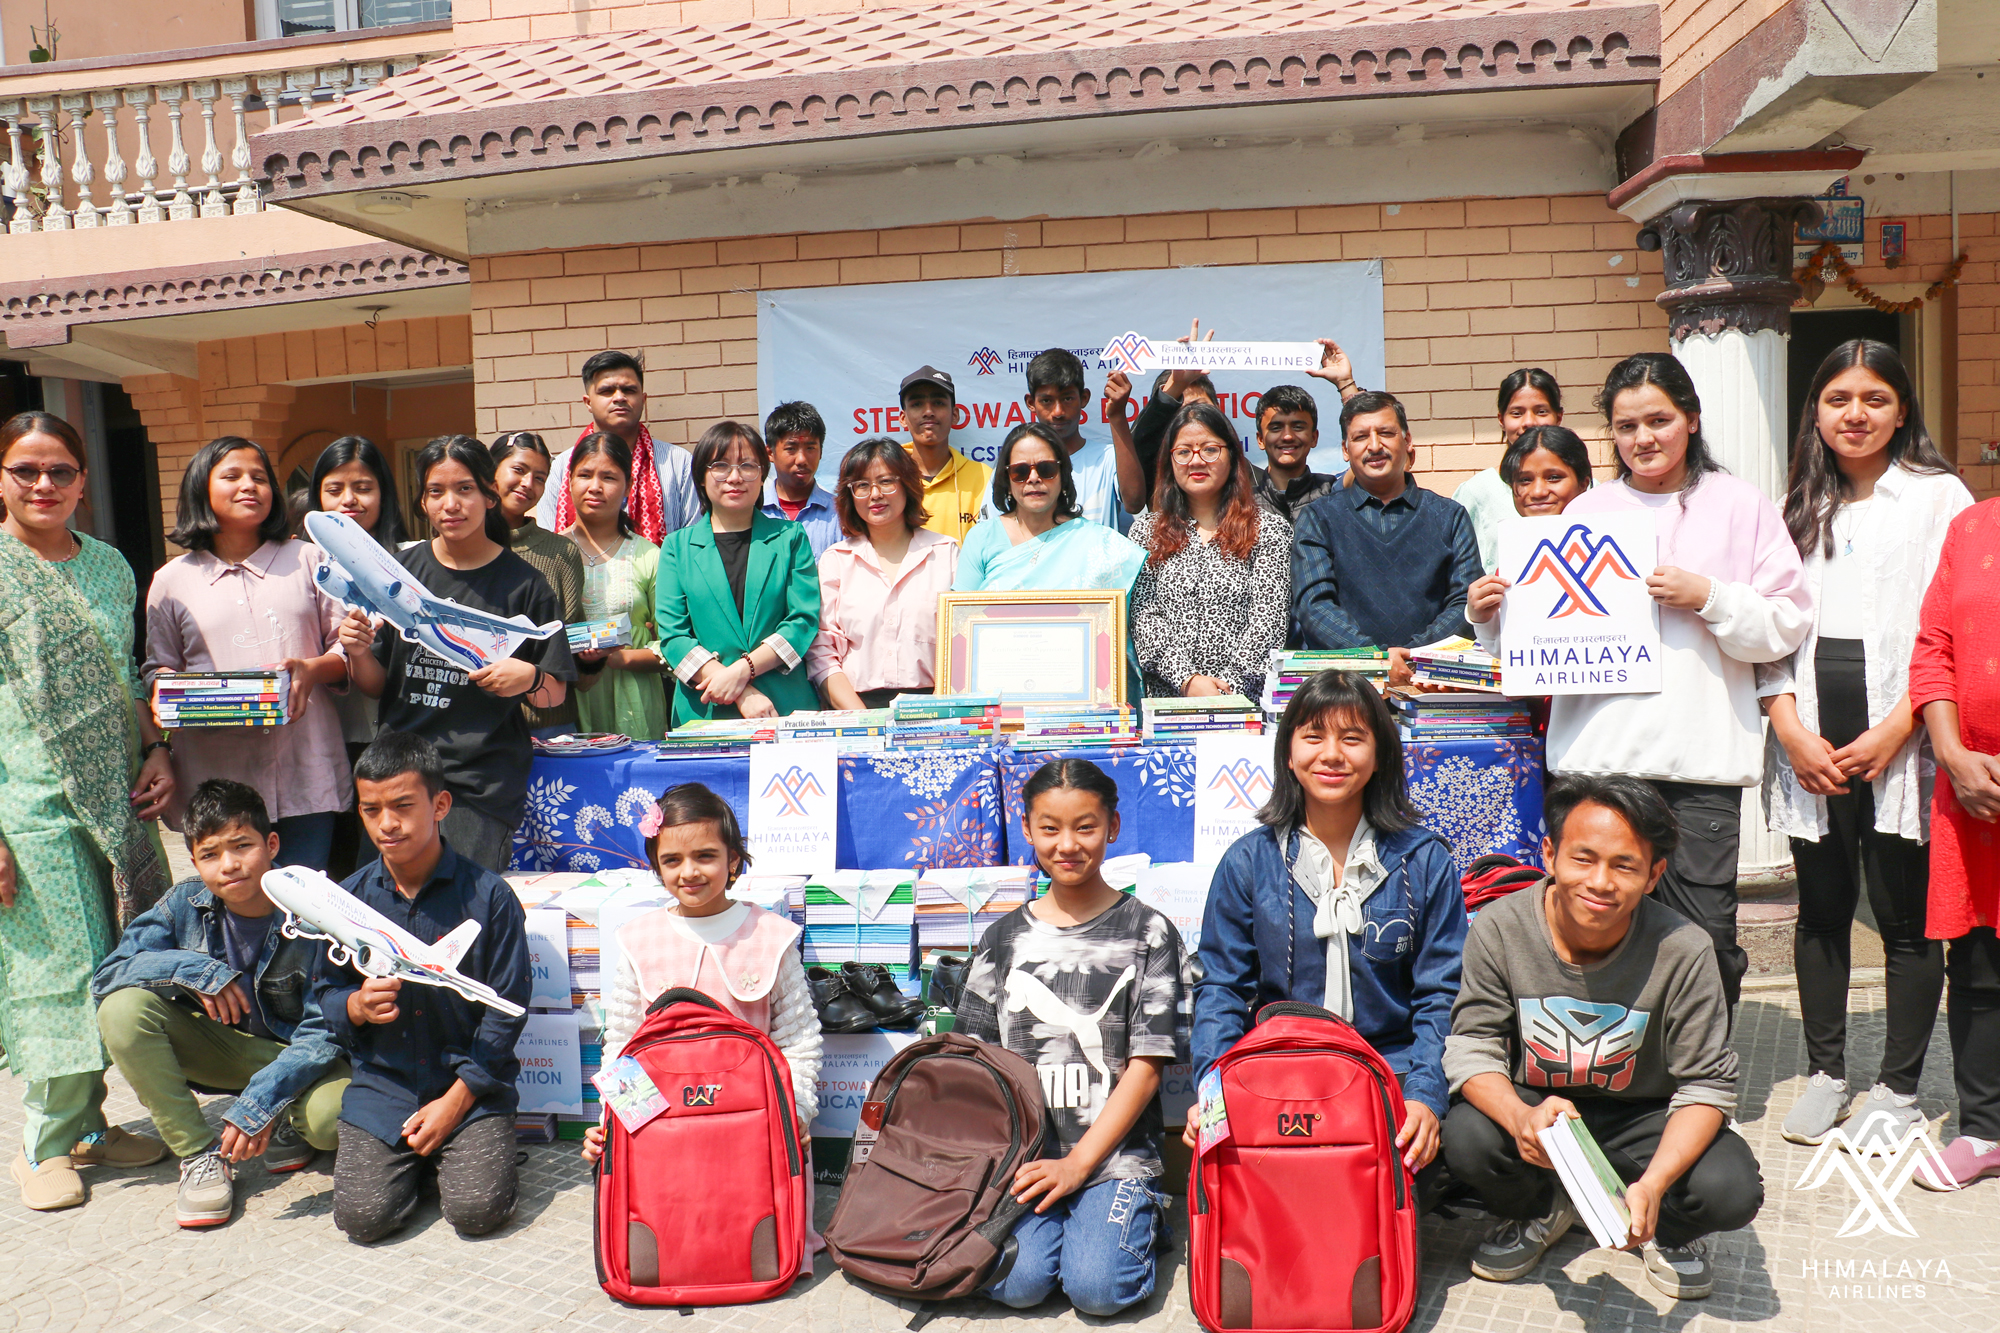 Himalaya Airlines conducts annual "Step Towards Education" campaign